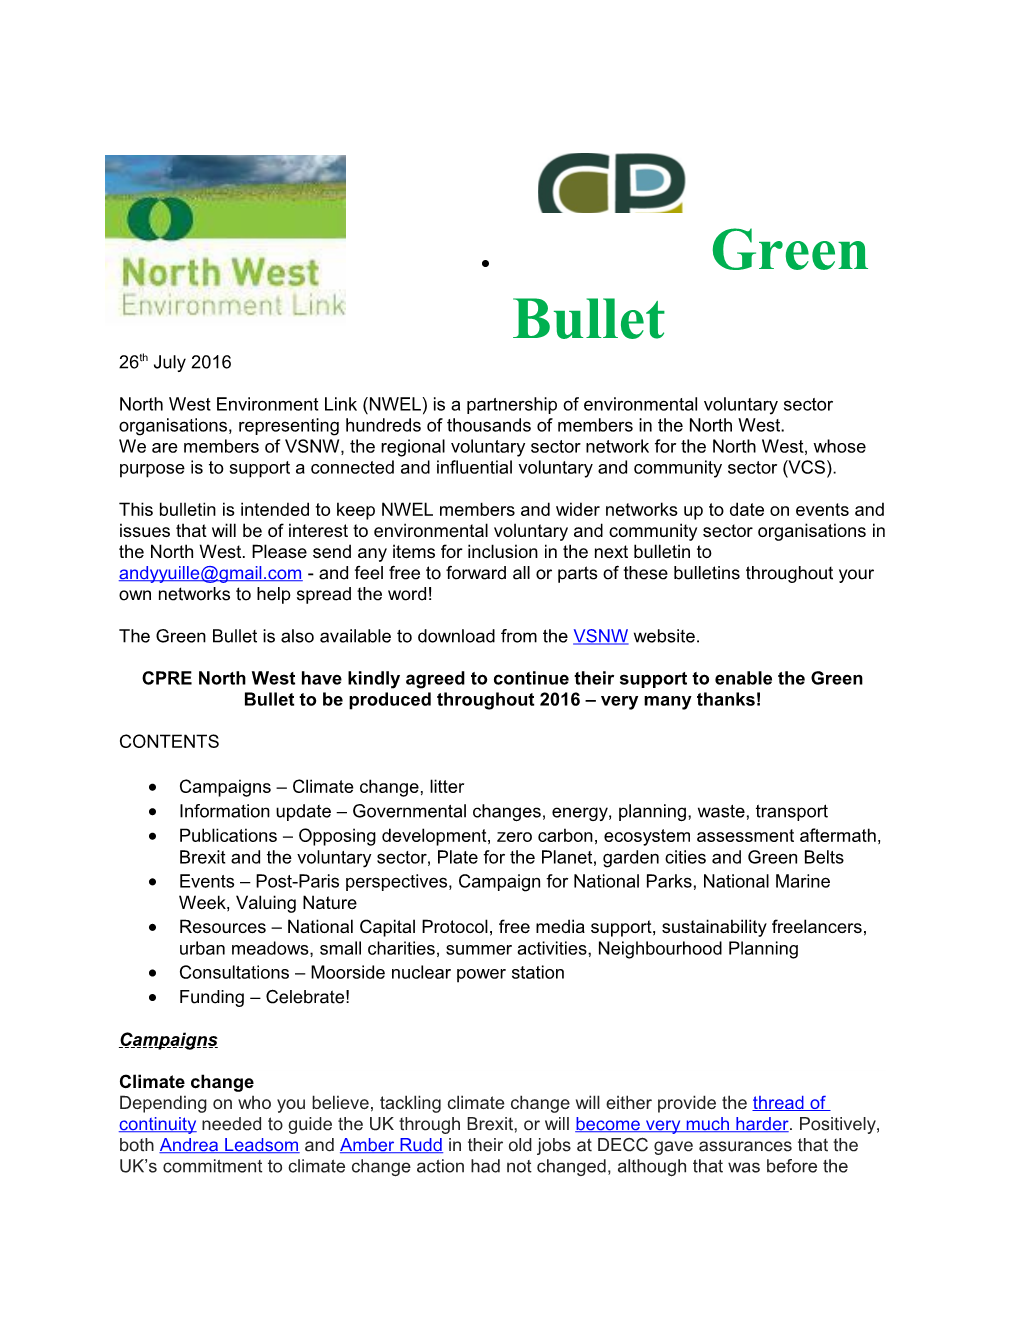 The Green Bullet Is Also Available to Download from the Vsnwwebsite